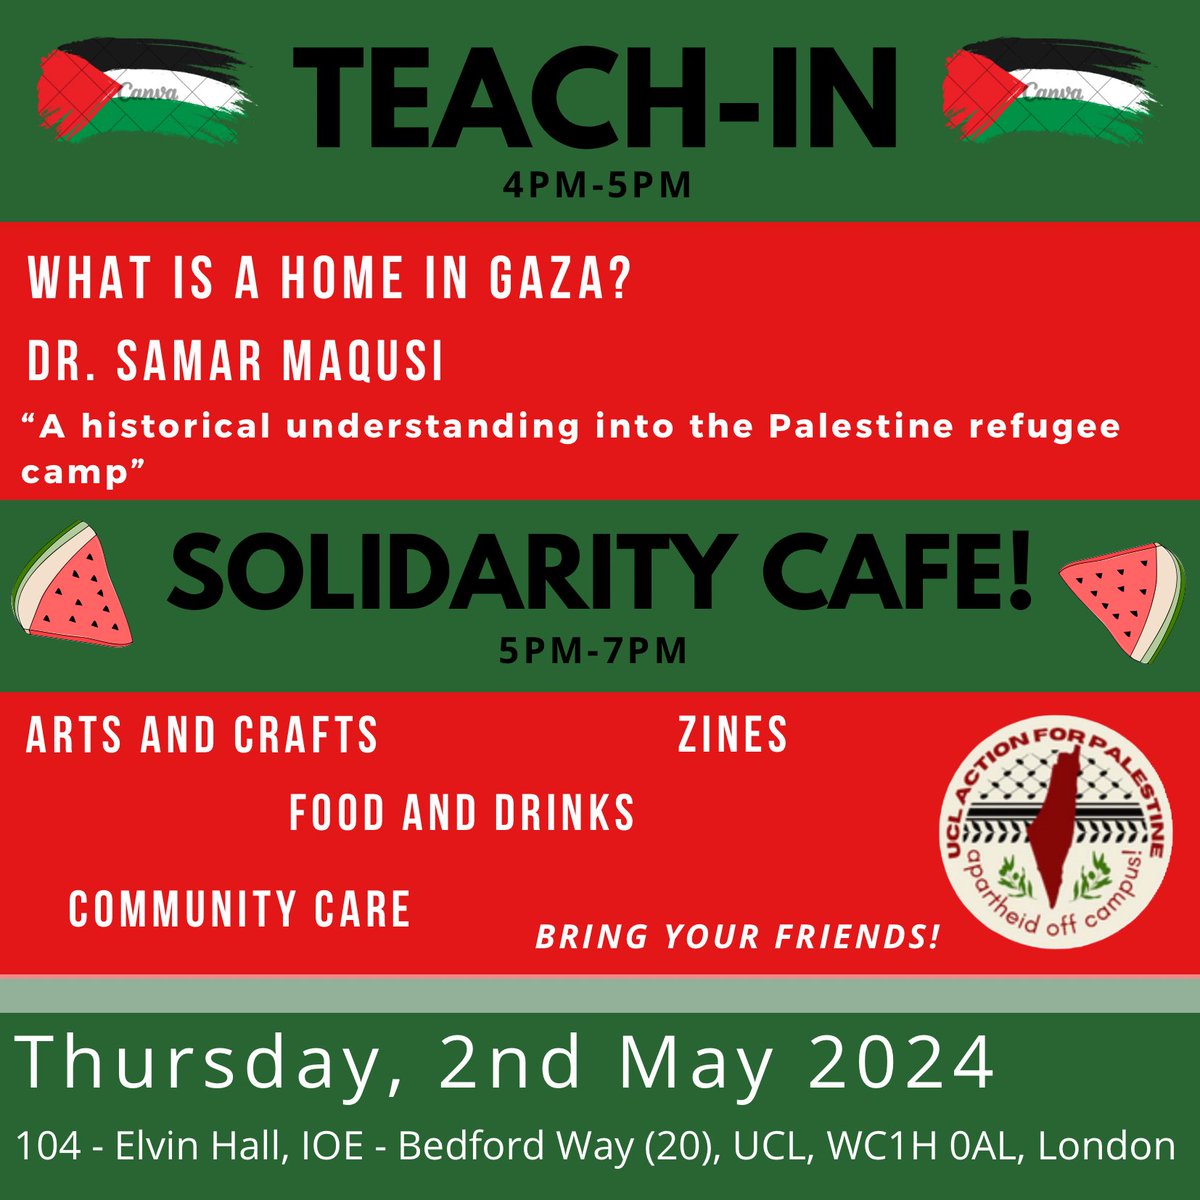 Interested in UCL Action for Palestine? Want to get more involved? Join us for a teach in with Dr Samar Maqusi this Thursday at 4pm followed by a solidarity café 5-7pm 🍉🇵🇸